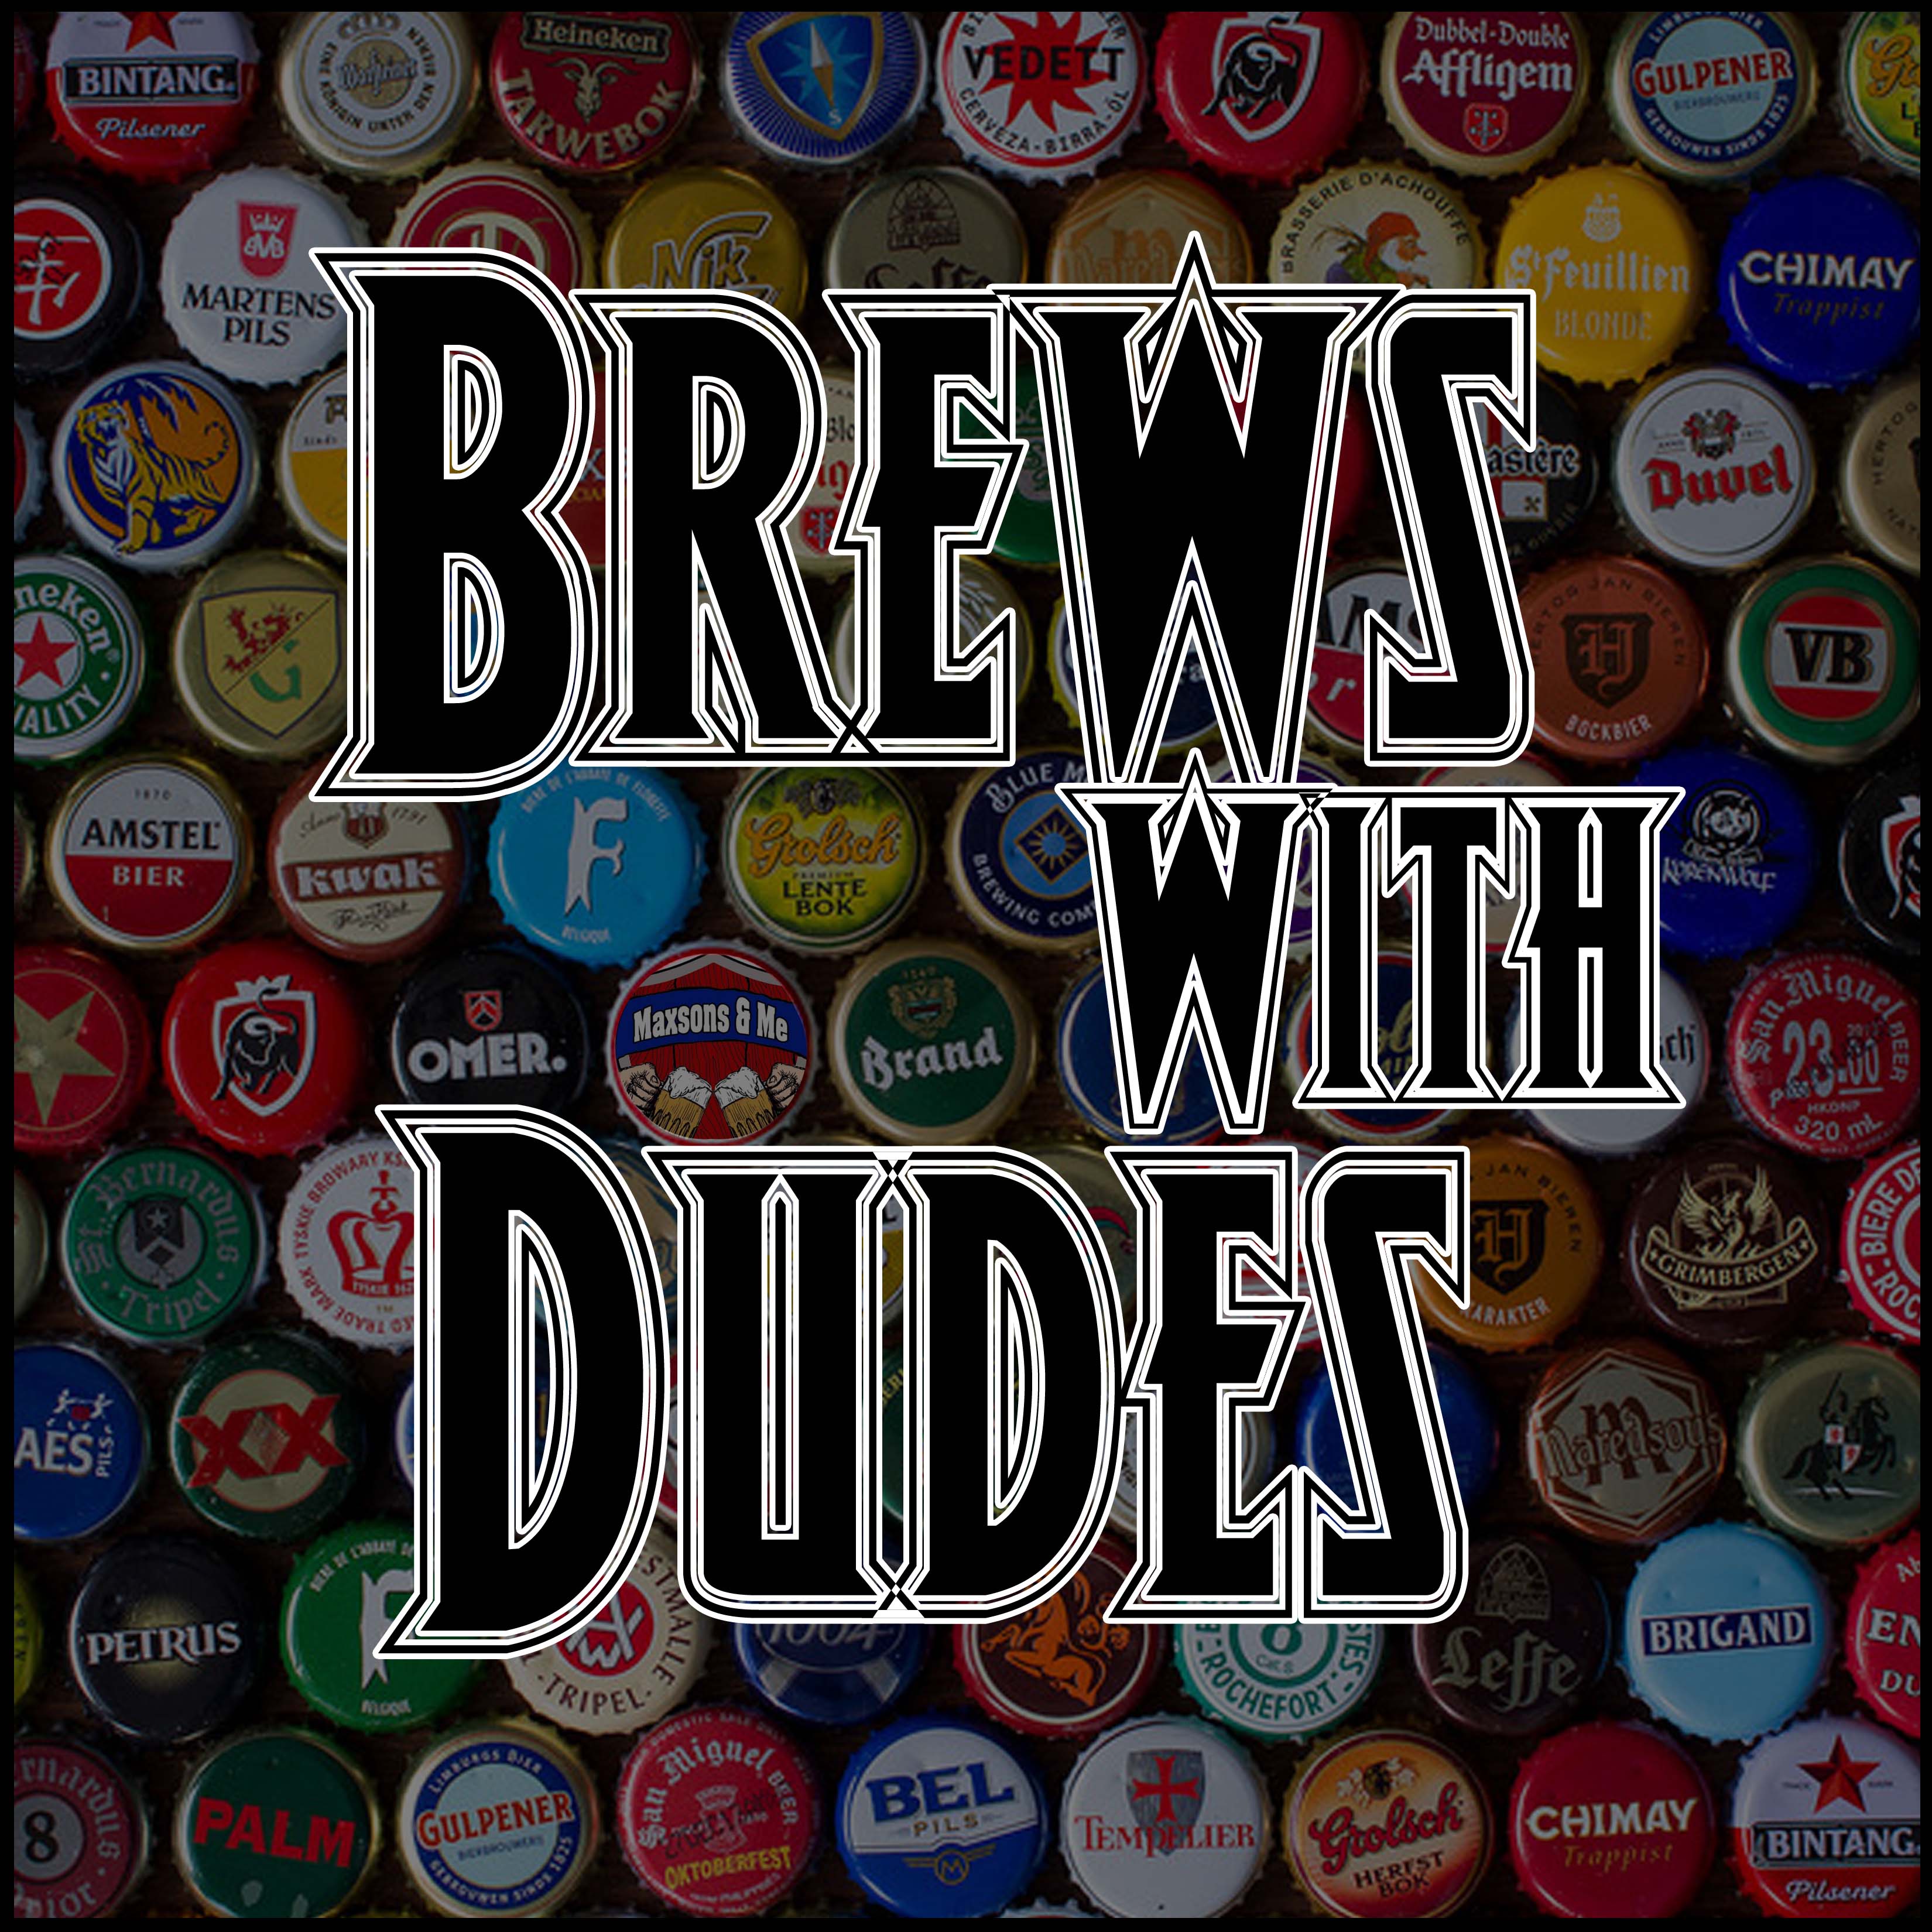 Brews With Dudes 018 - 450 North Brewing Tap Takeover